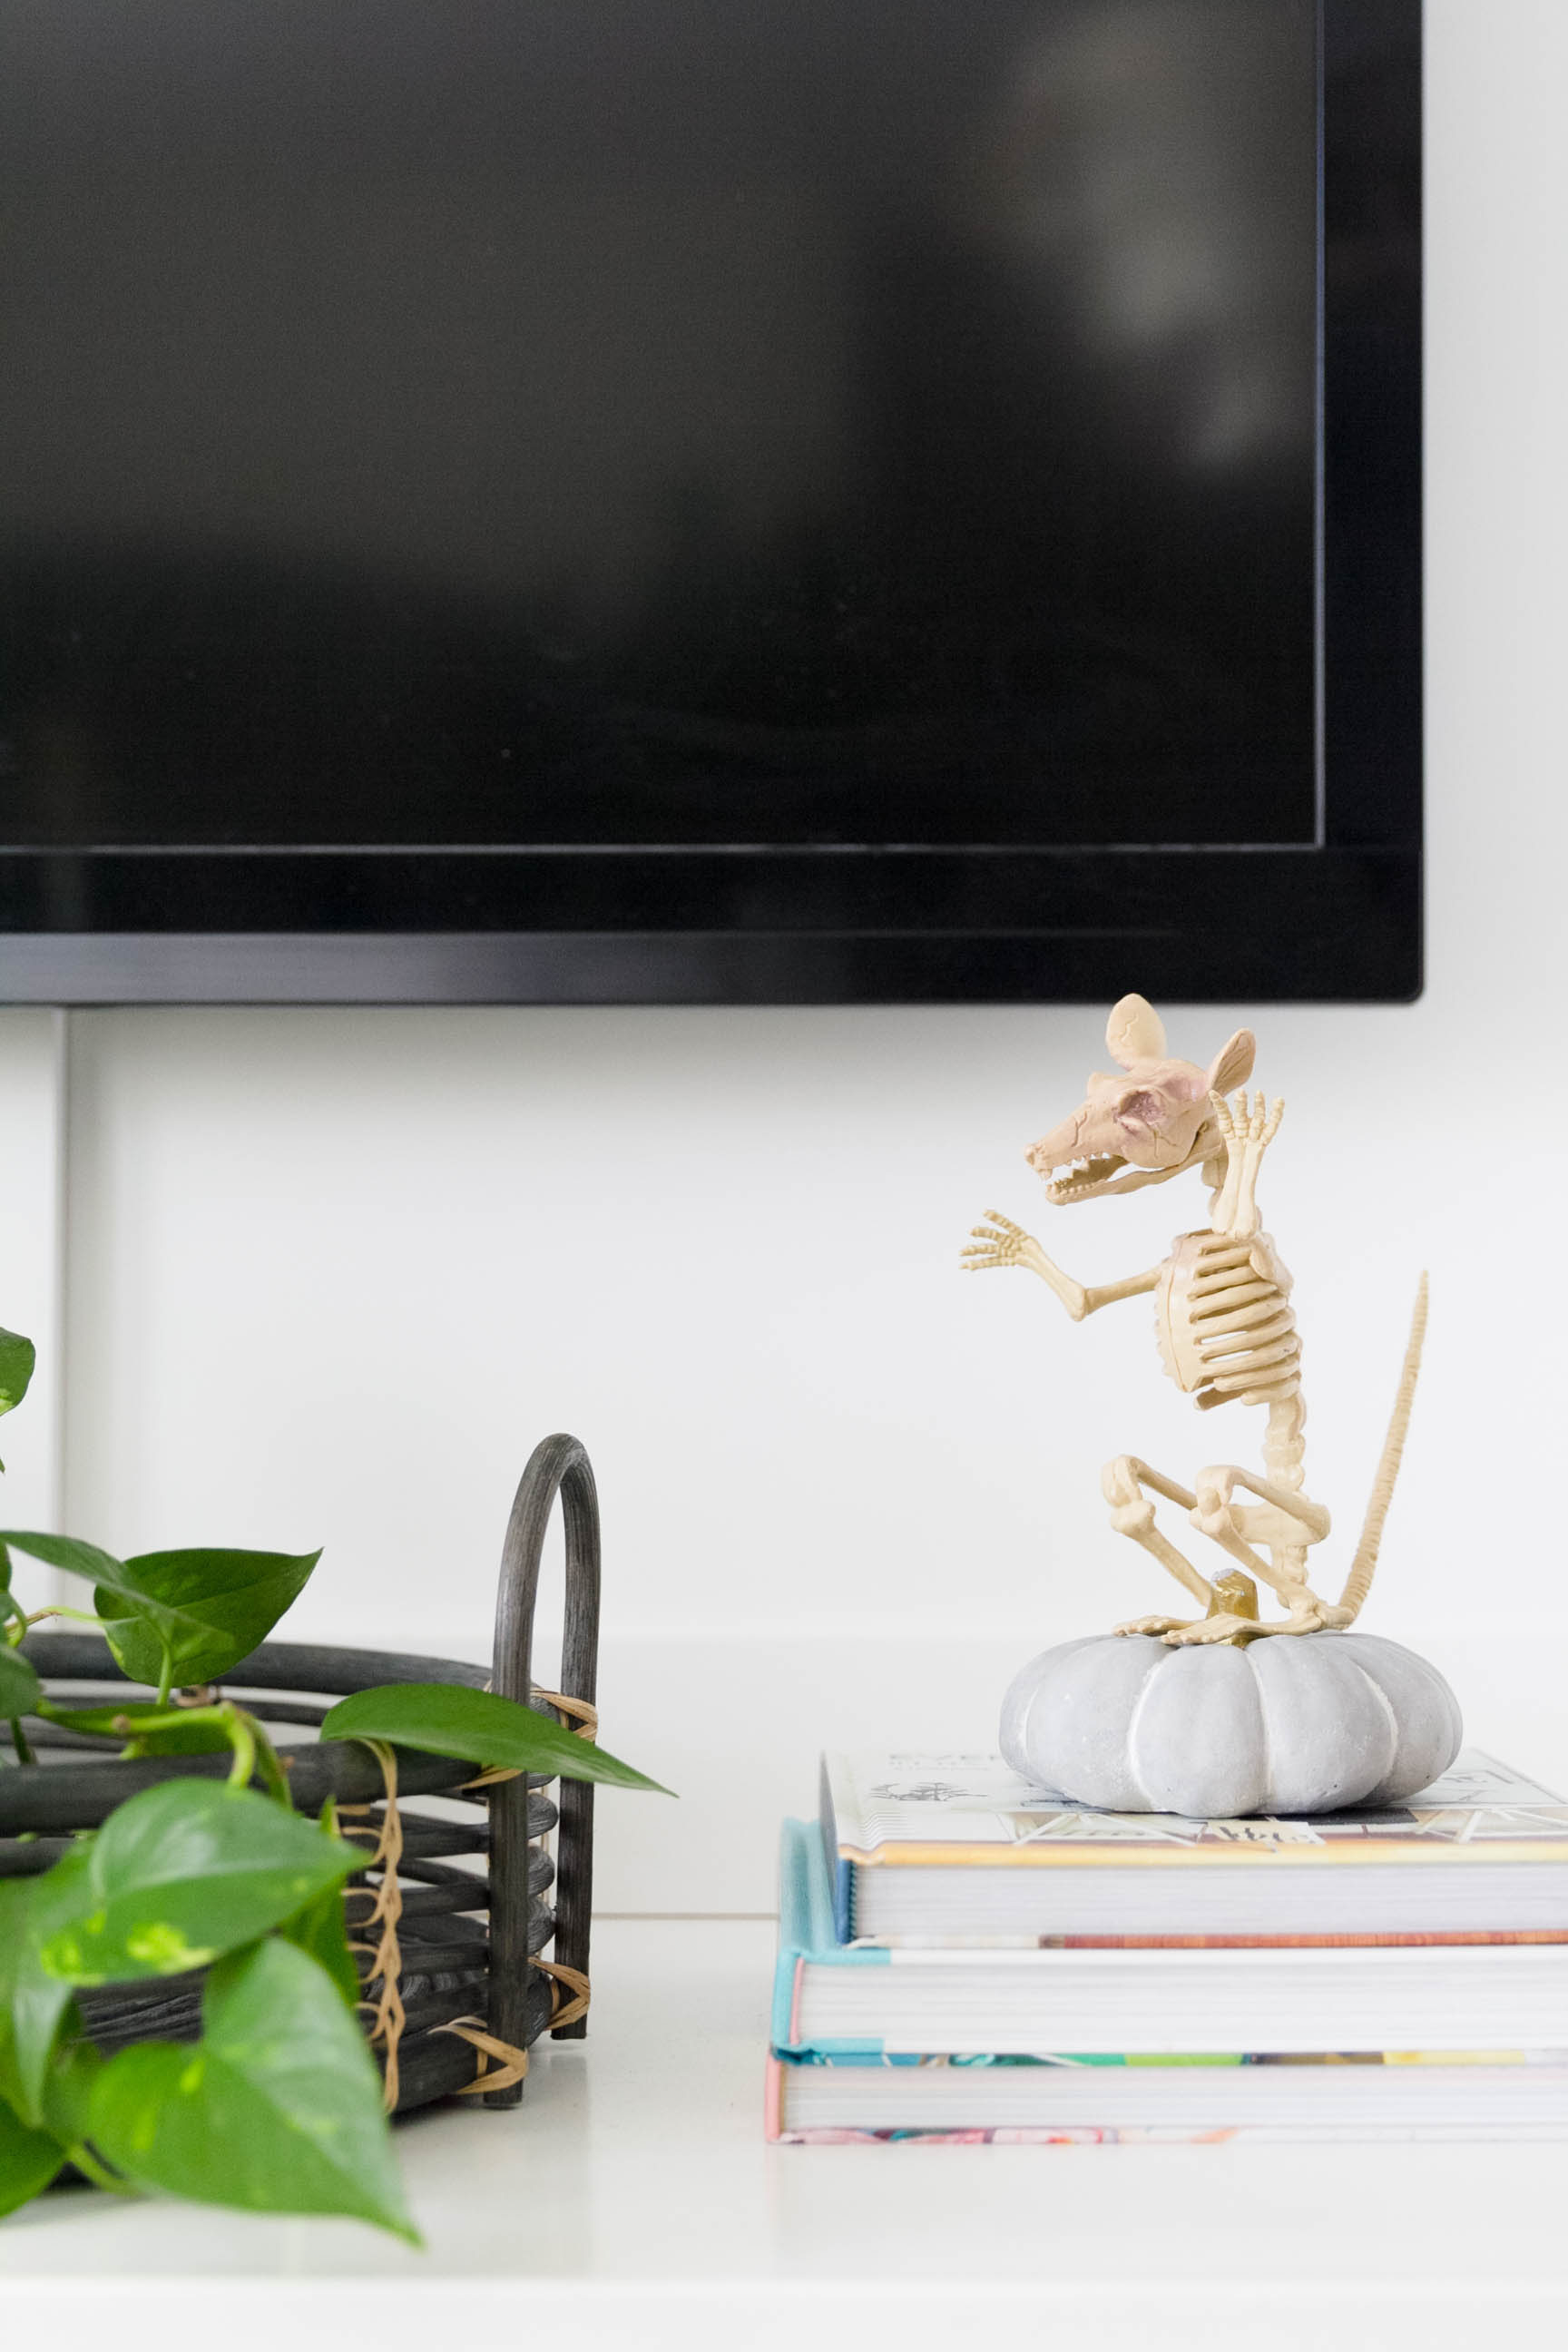 Simple Halloween Decorations for the Home-Rat Skeleton